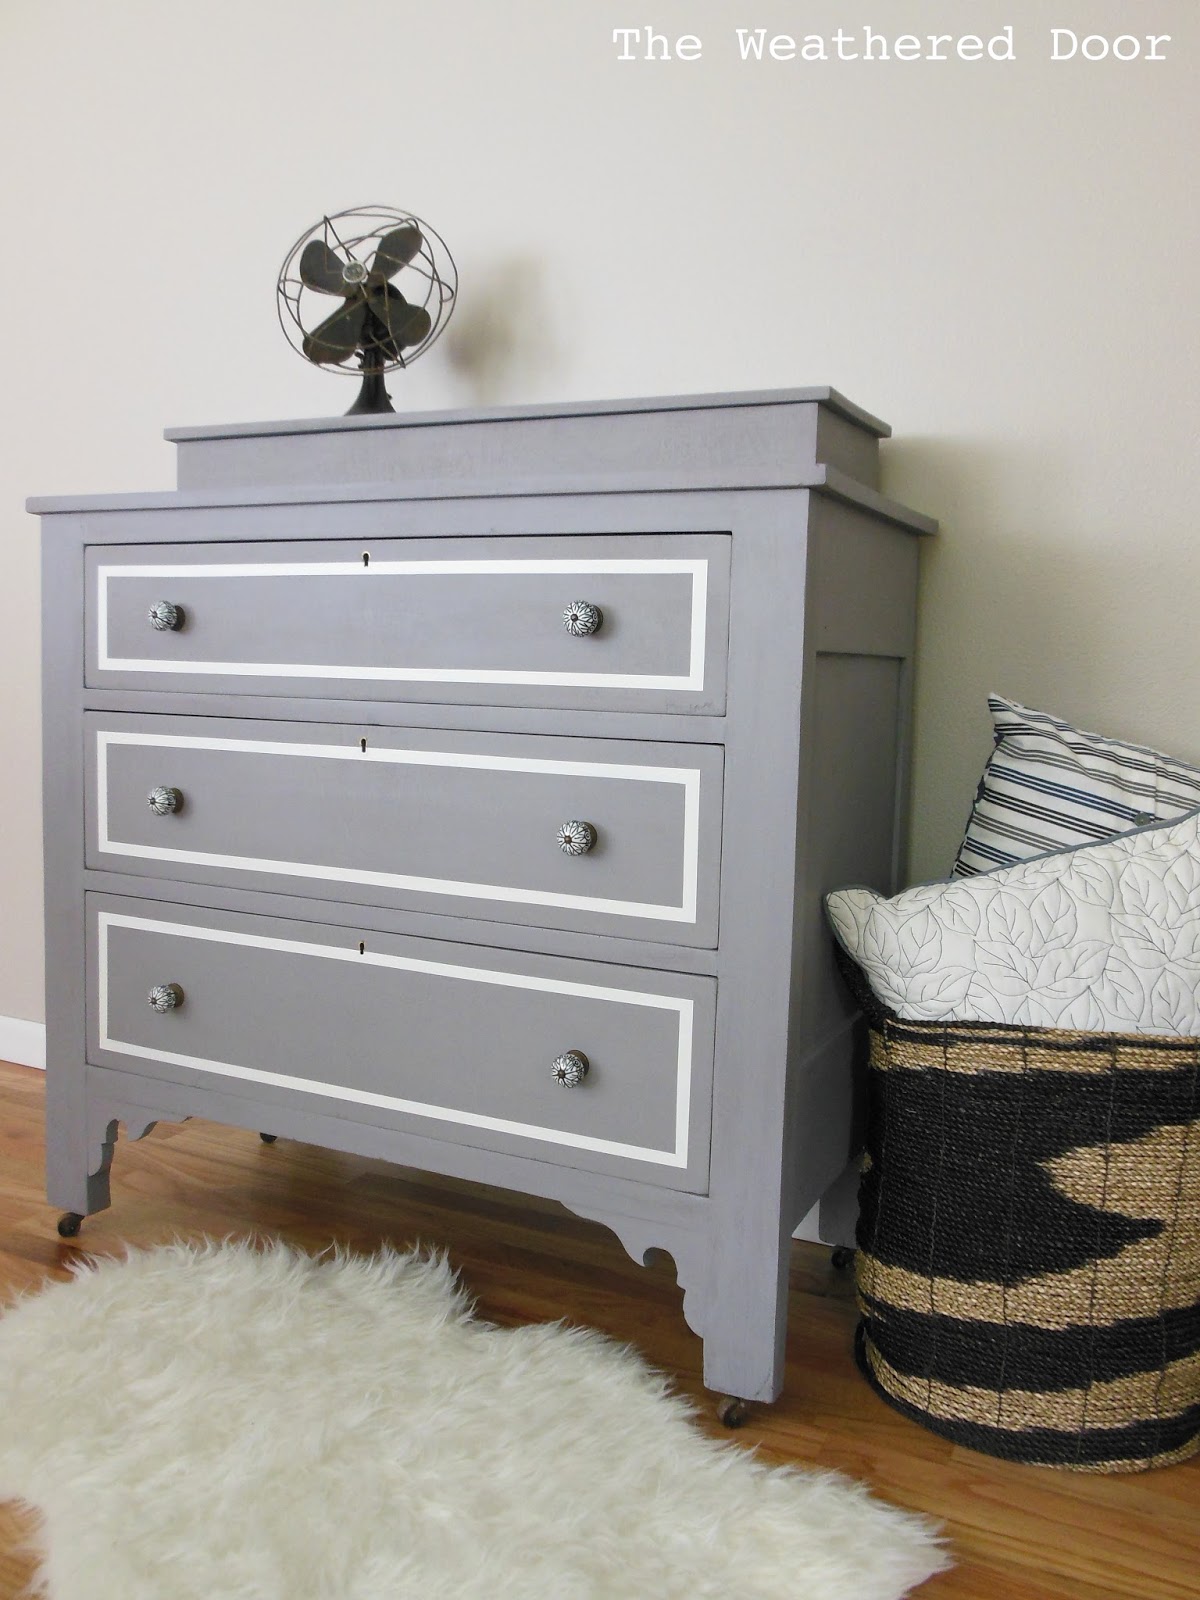 A plum-grey dresser with modern lines - The Weathered Door